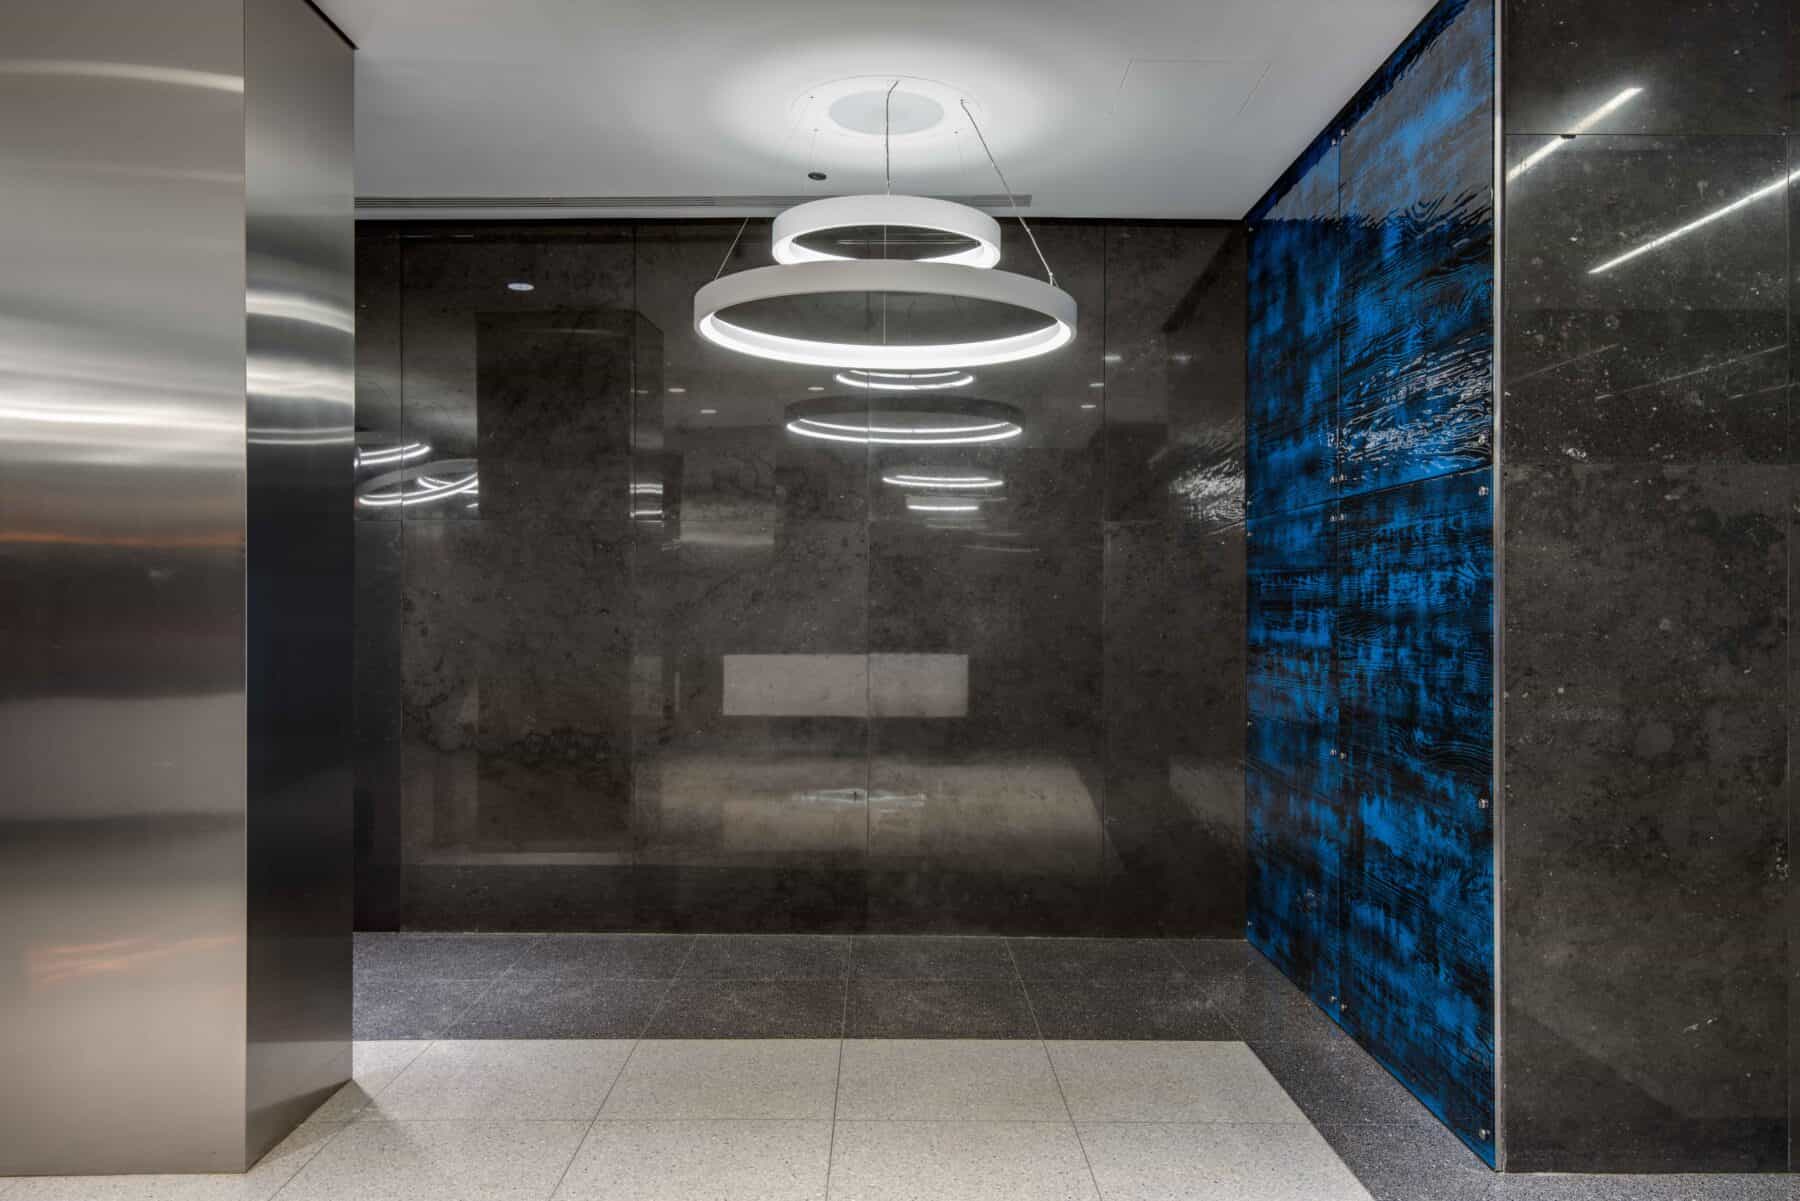 Michigan Avenue Lobby Remodel with Custom Circular lights and Glass Wall Panels by Commercial Builder & General Contractor Structural Enterprises